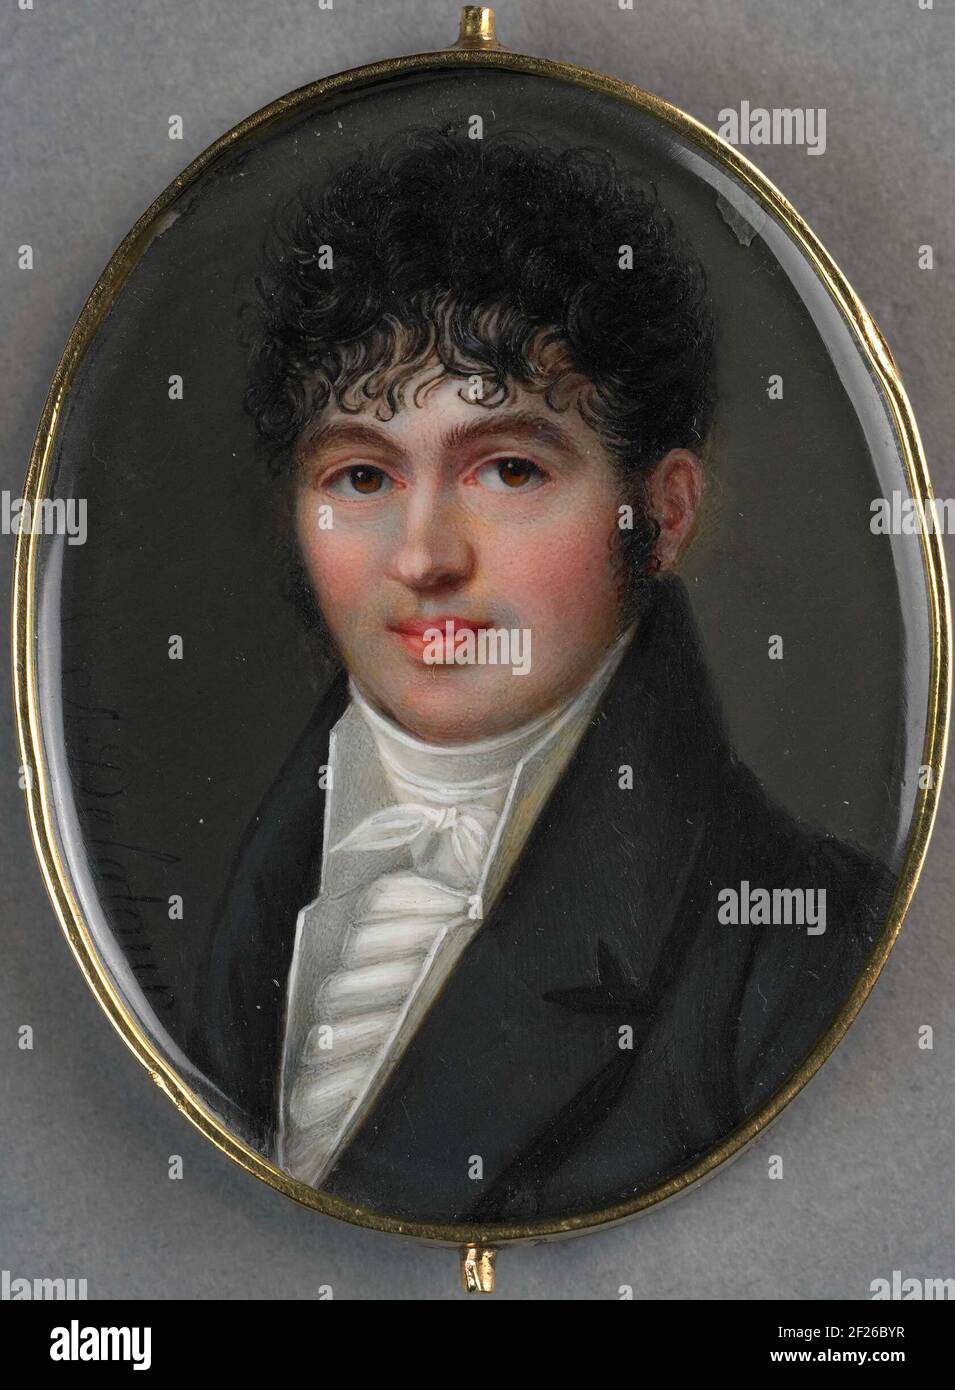 Portret van een onbekende man.Portrait of an unknown man. Oval portrait miniature in slippery golden list, representing a young man with dark curly, loose over the forehead falling. The person portrayed is shown against a dark gray background. The back is decorated with a two-tone hair decor, representing a corn sheaf. Part of the portrait miniaturen collection. Stock Photo